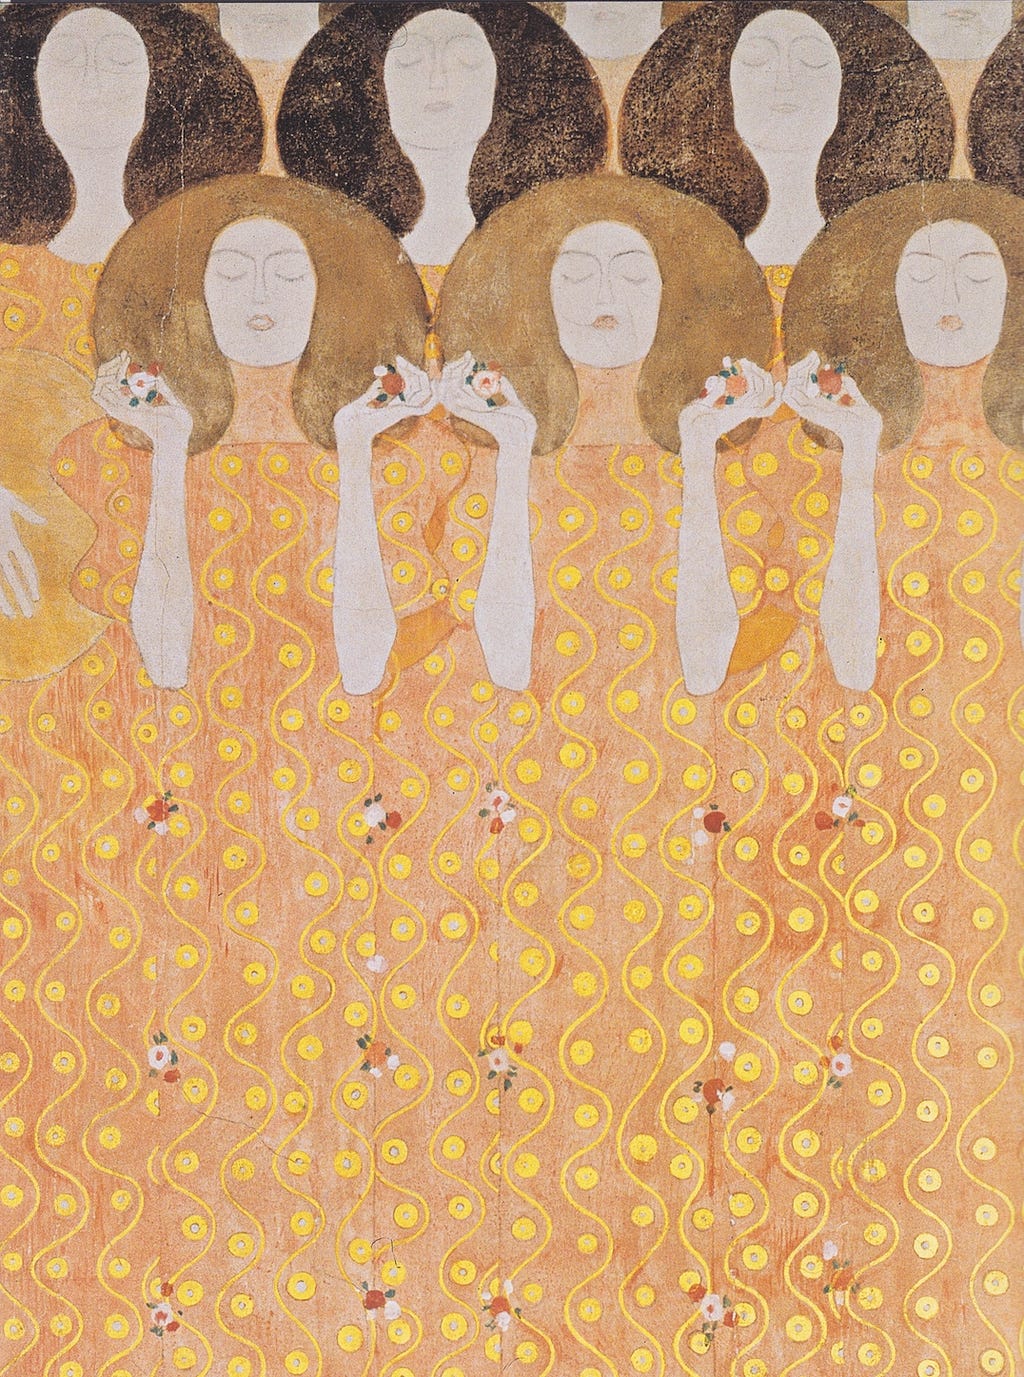 Gustav Klimt’s Beethoven Frieze, Secession Building, Vienna, 2 rows of women with faces uplifted and eyes closed. Their dresses fused into one made of gold swiggles and circles dotted with small flowers